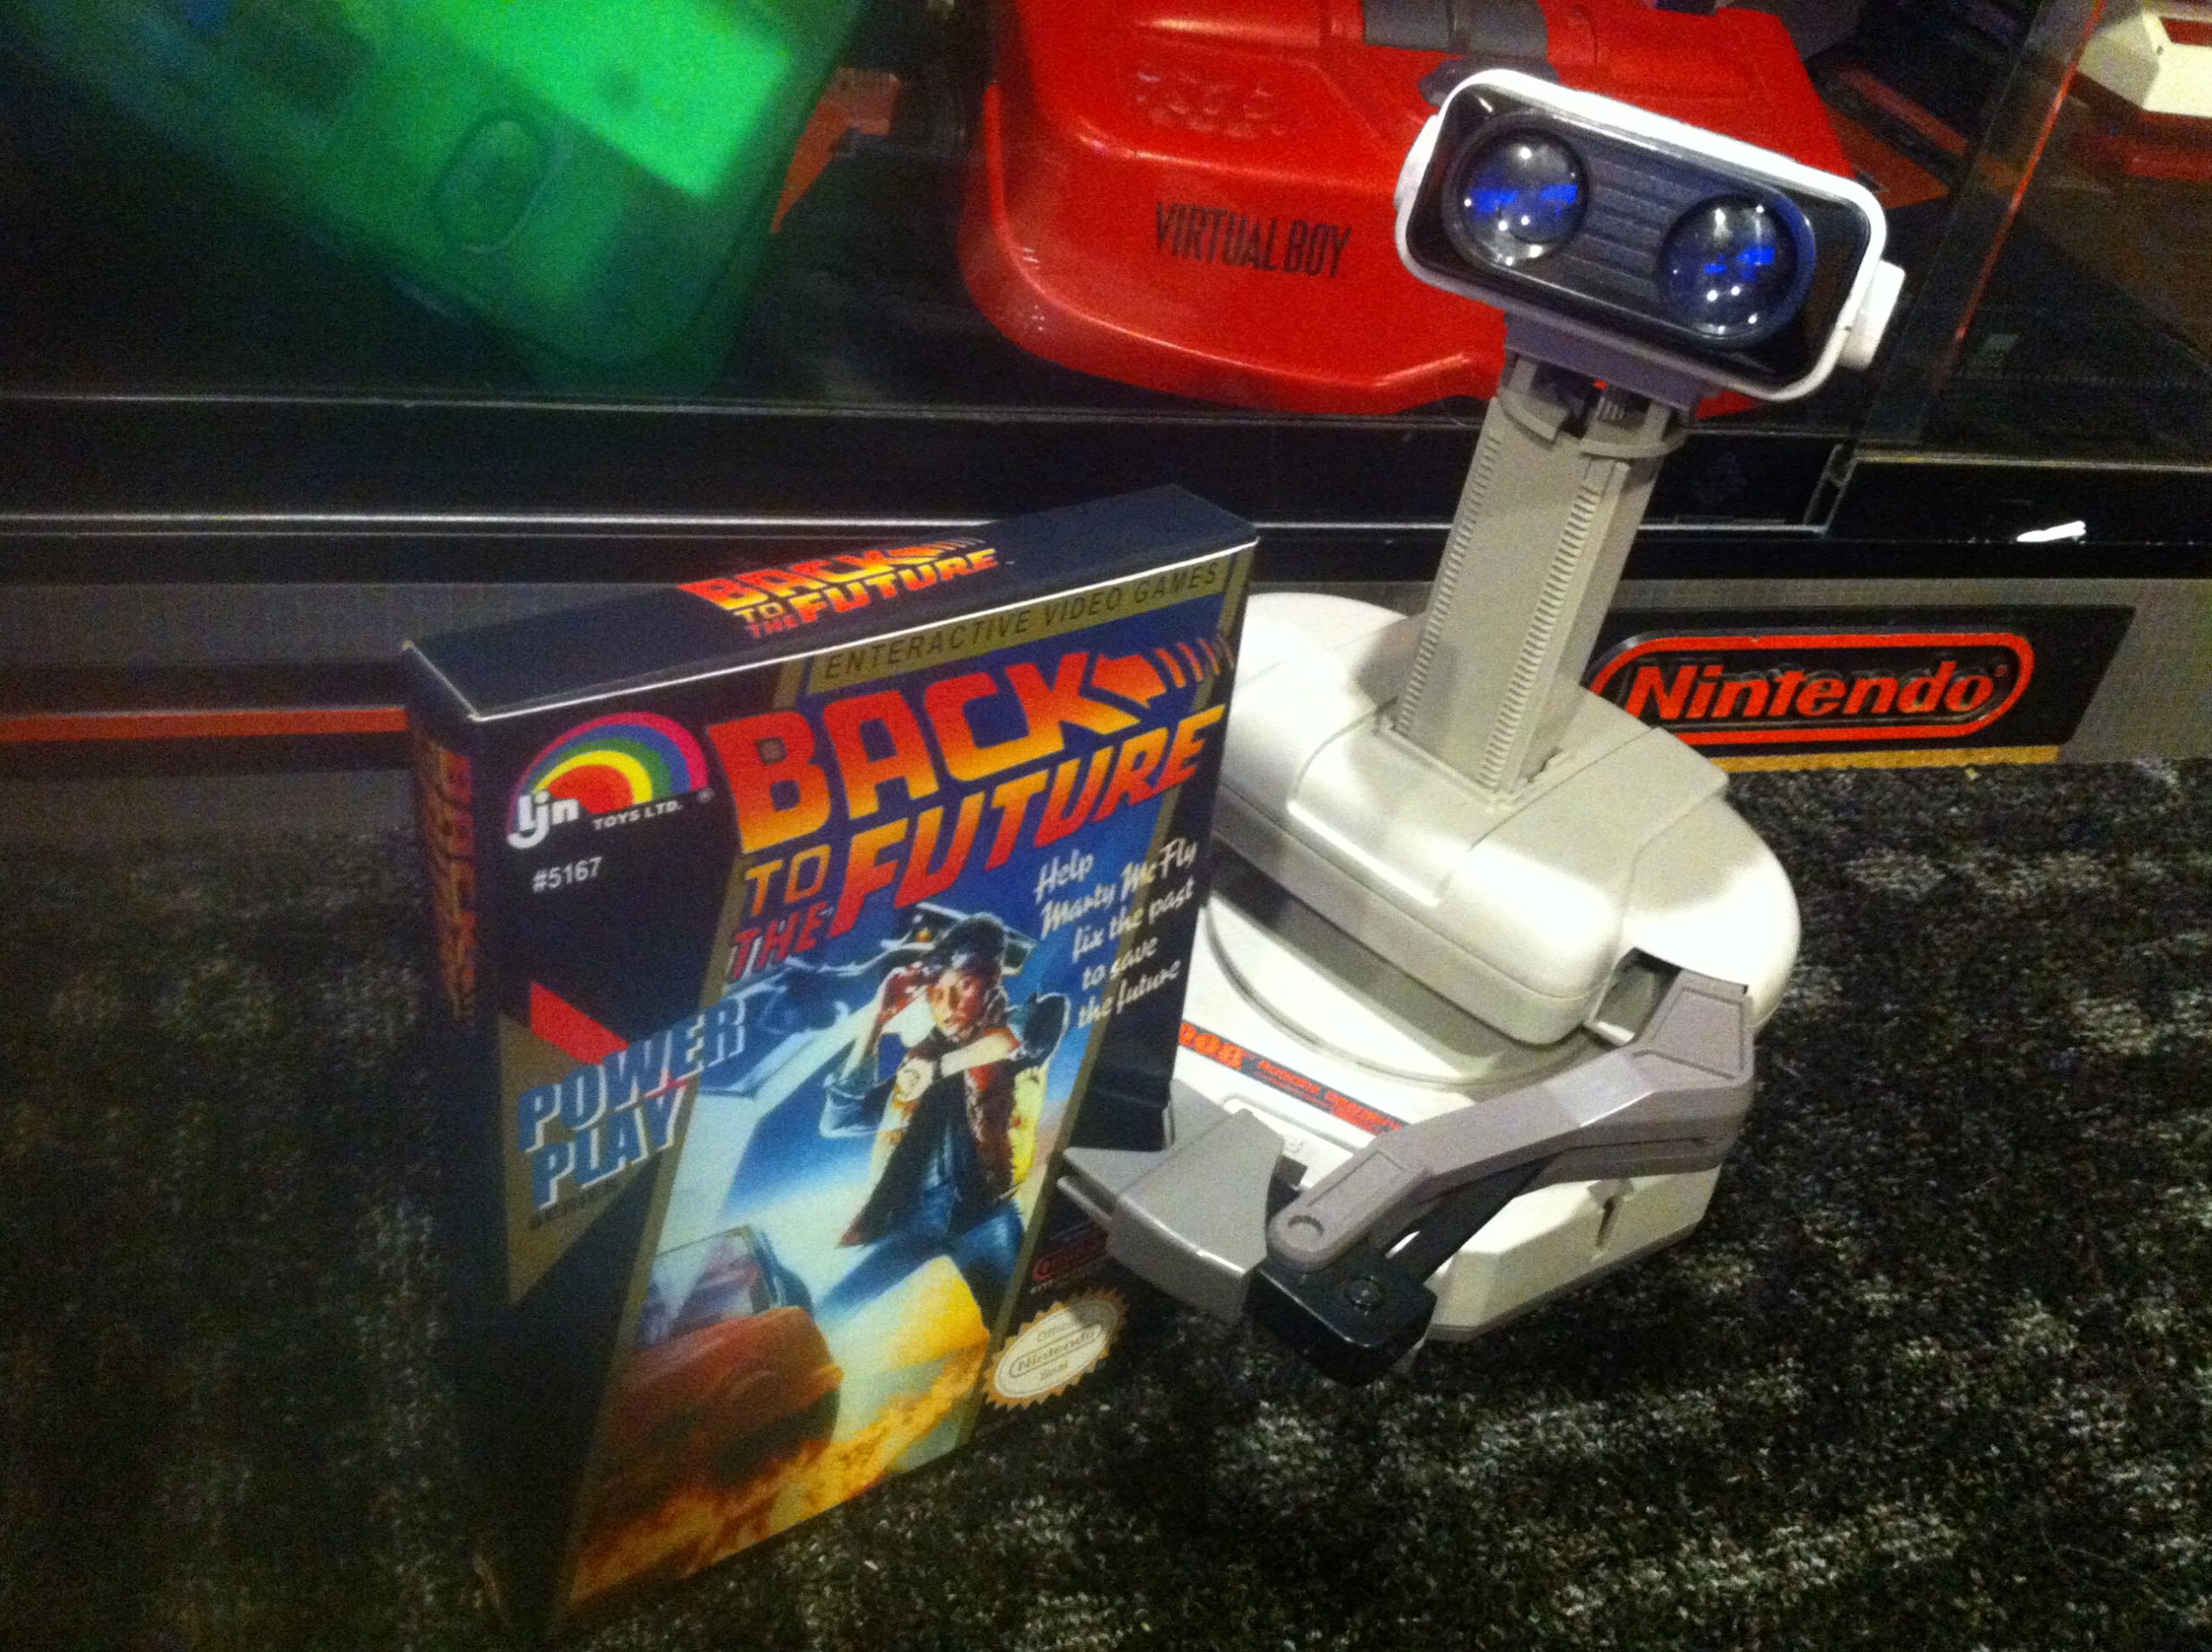 Back to The Future NES BoxBox My Games! Reproduction game boxes